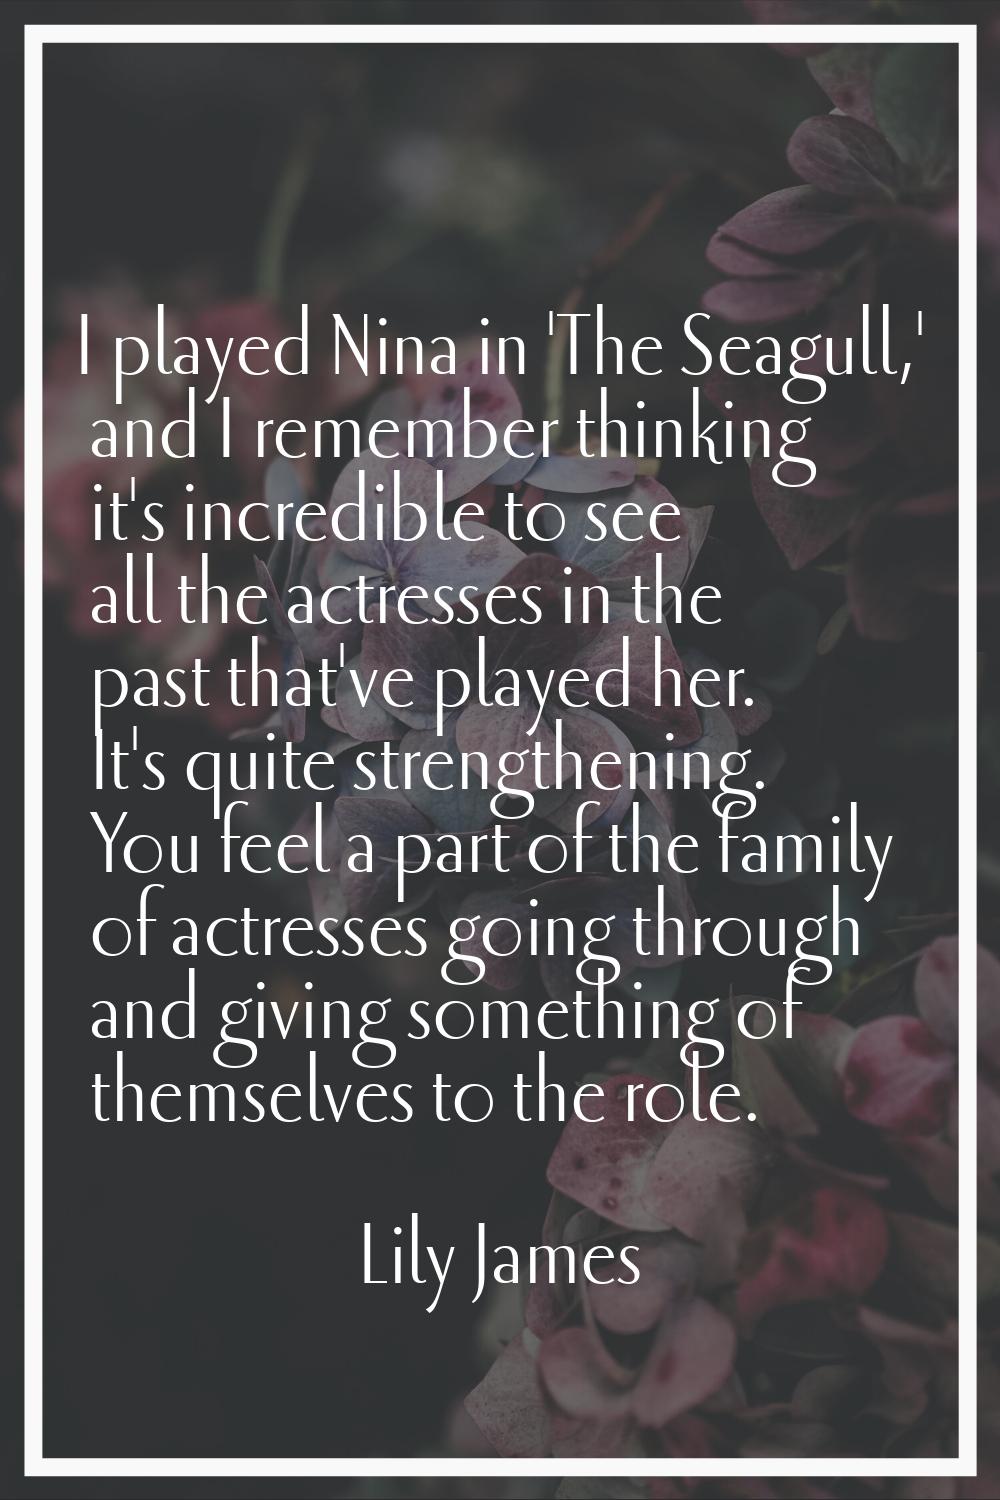 I played Nina in 'The Seagull,' and I remember thinking it's incredible to see all the actresses in